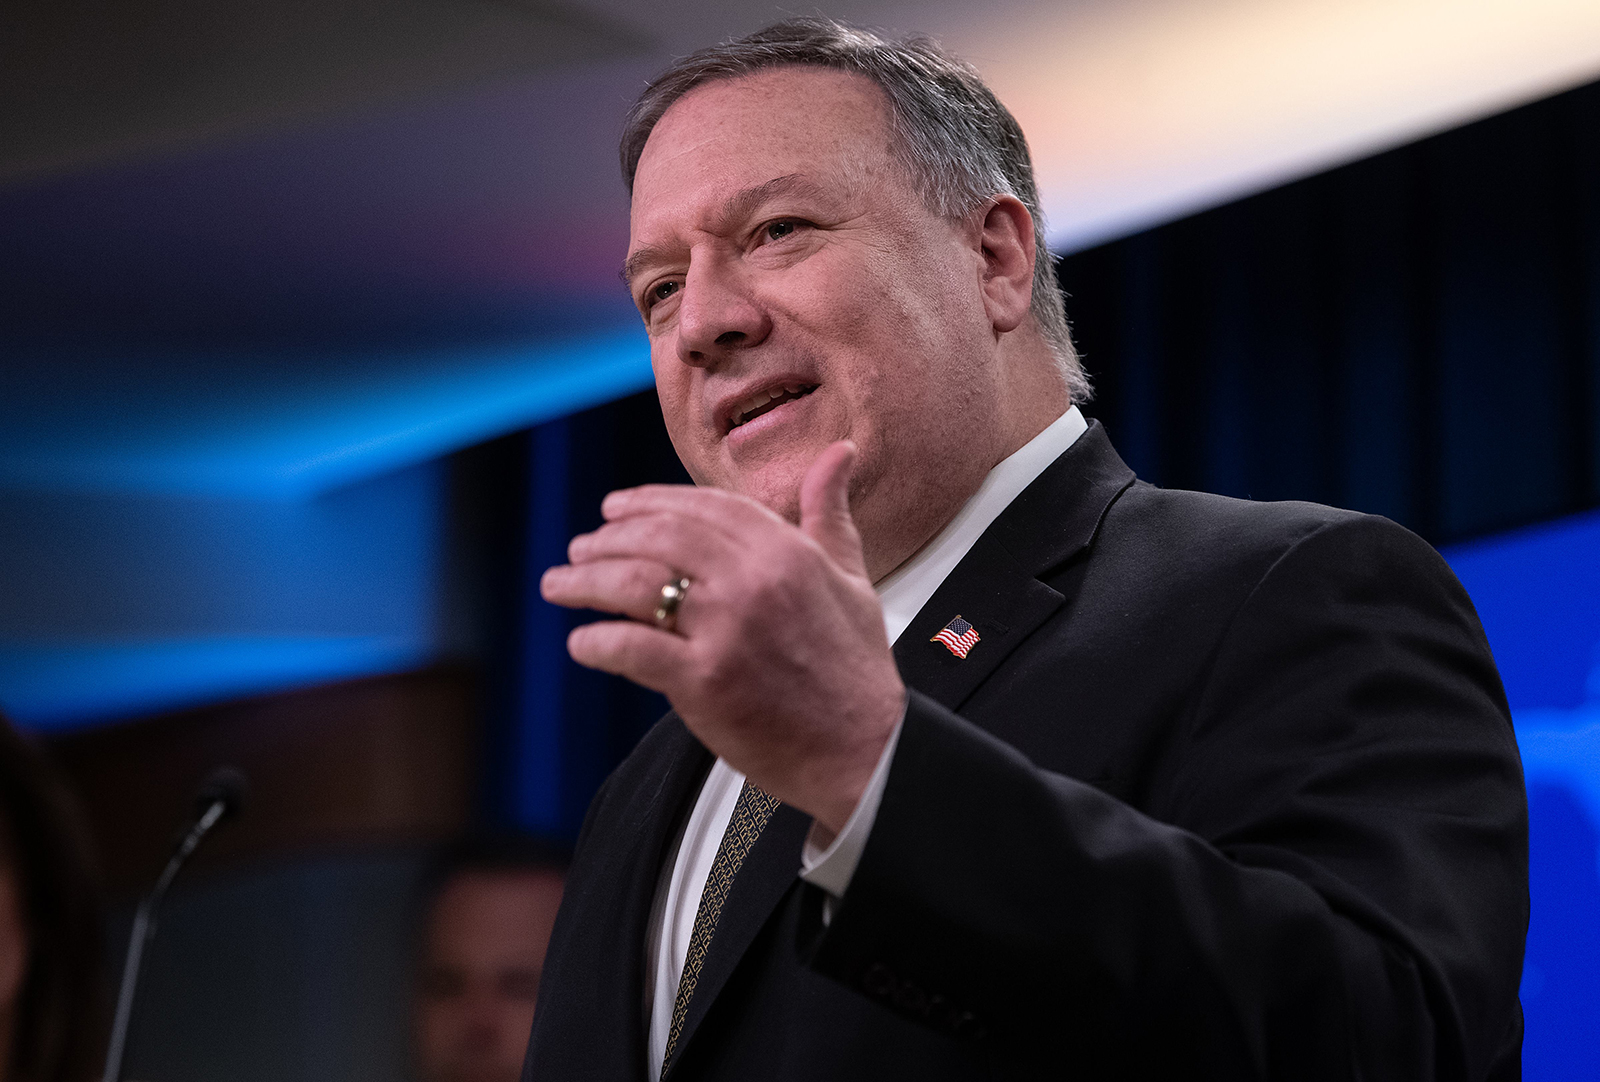 US Secretary of State Mike Pompeo speaks at a news briefing at the State Department in Washington, DC, on April 22, 2020.